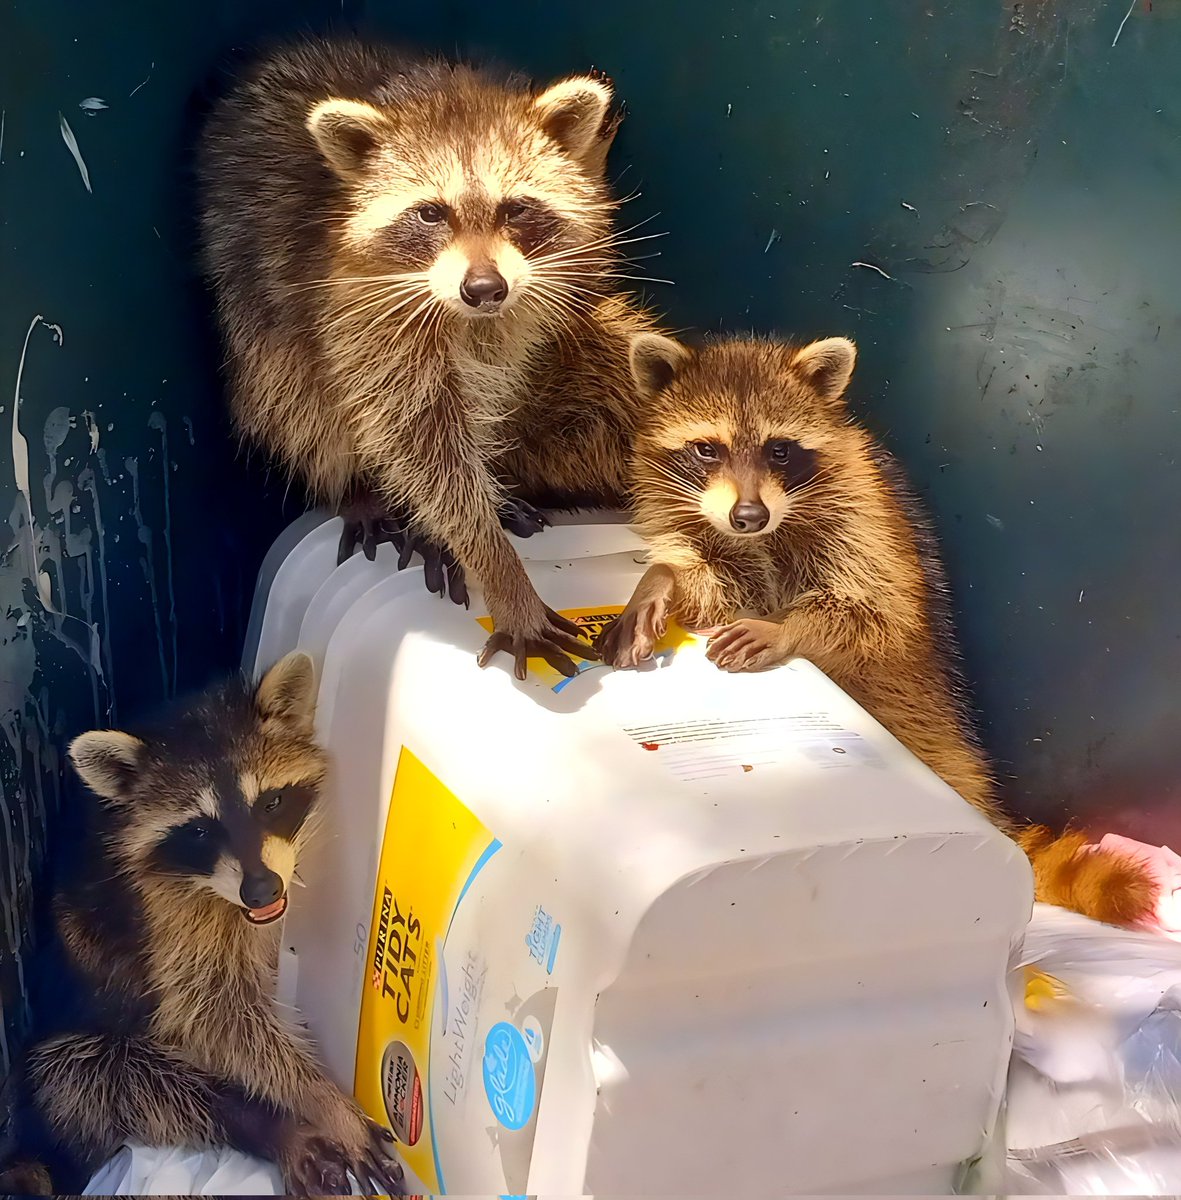 Saw these raccoons in the dumpster. I had to help them get out the next day. #pets #pet #dogs #petsofinstagram #dog #dogsofinstagram #animals #cats #cute #love #petstagram #cat #puppy #doglover #catsofinstagram #doglovers #dogstagram #instadog #petlovers #dogoftheday #animal